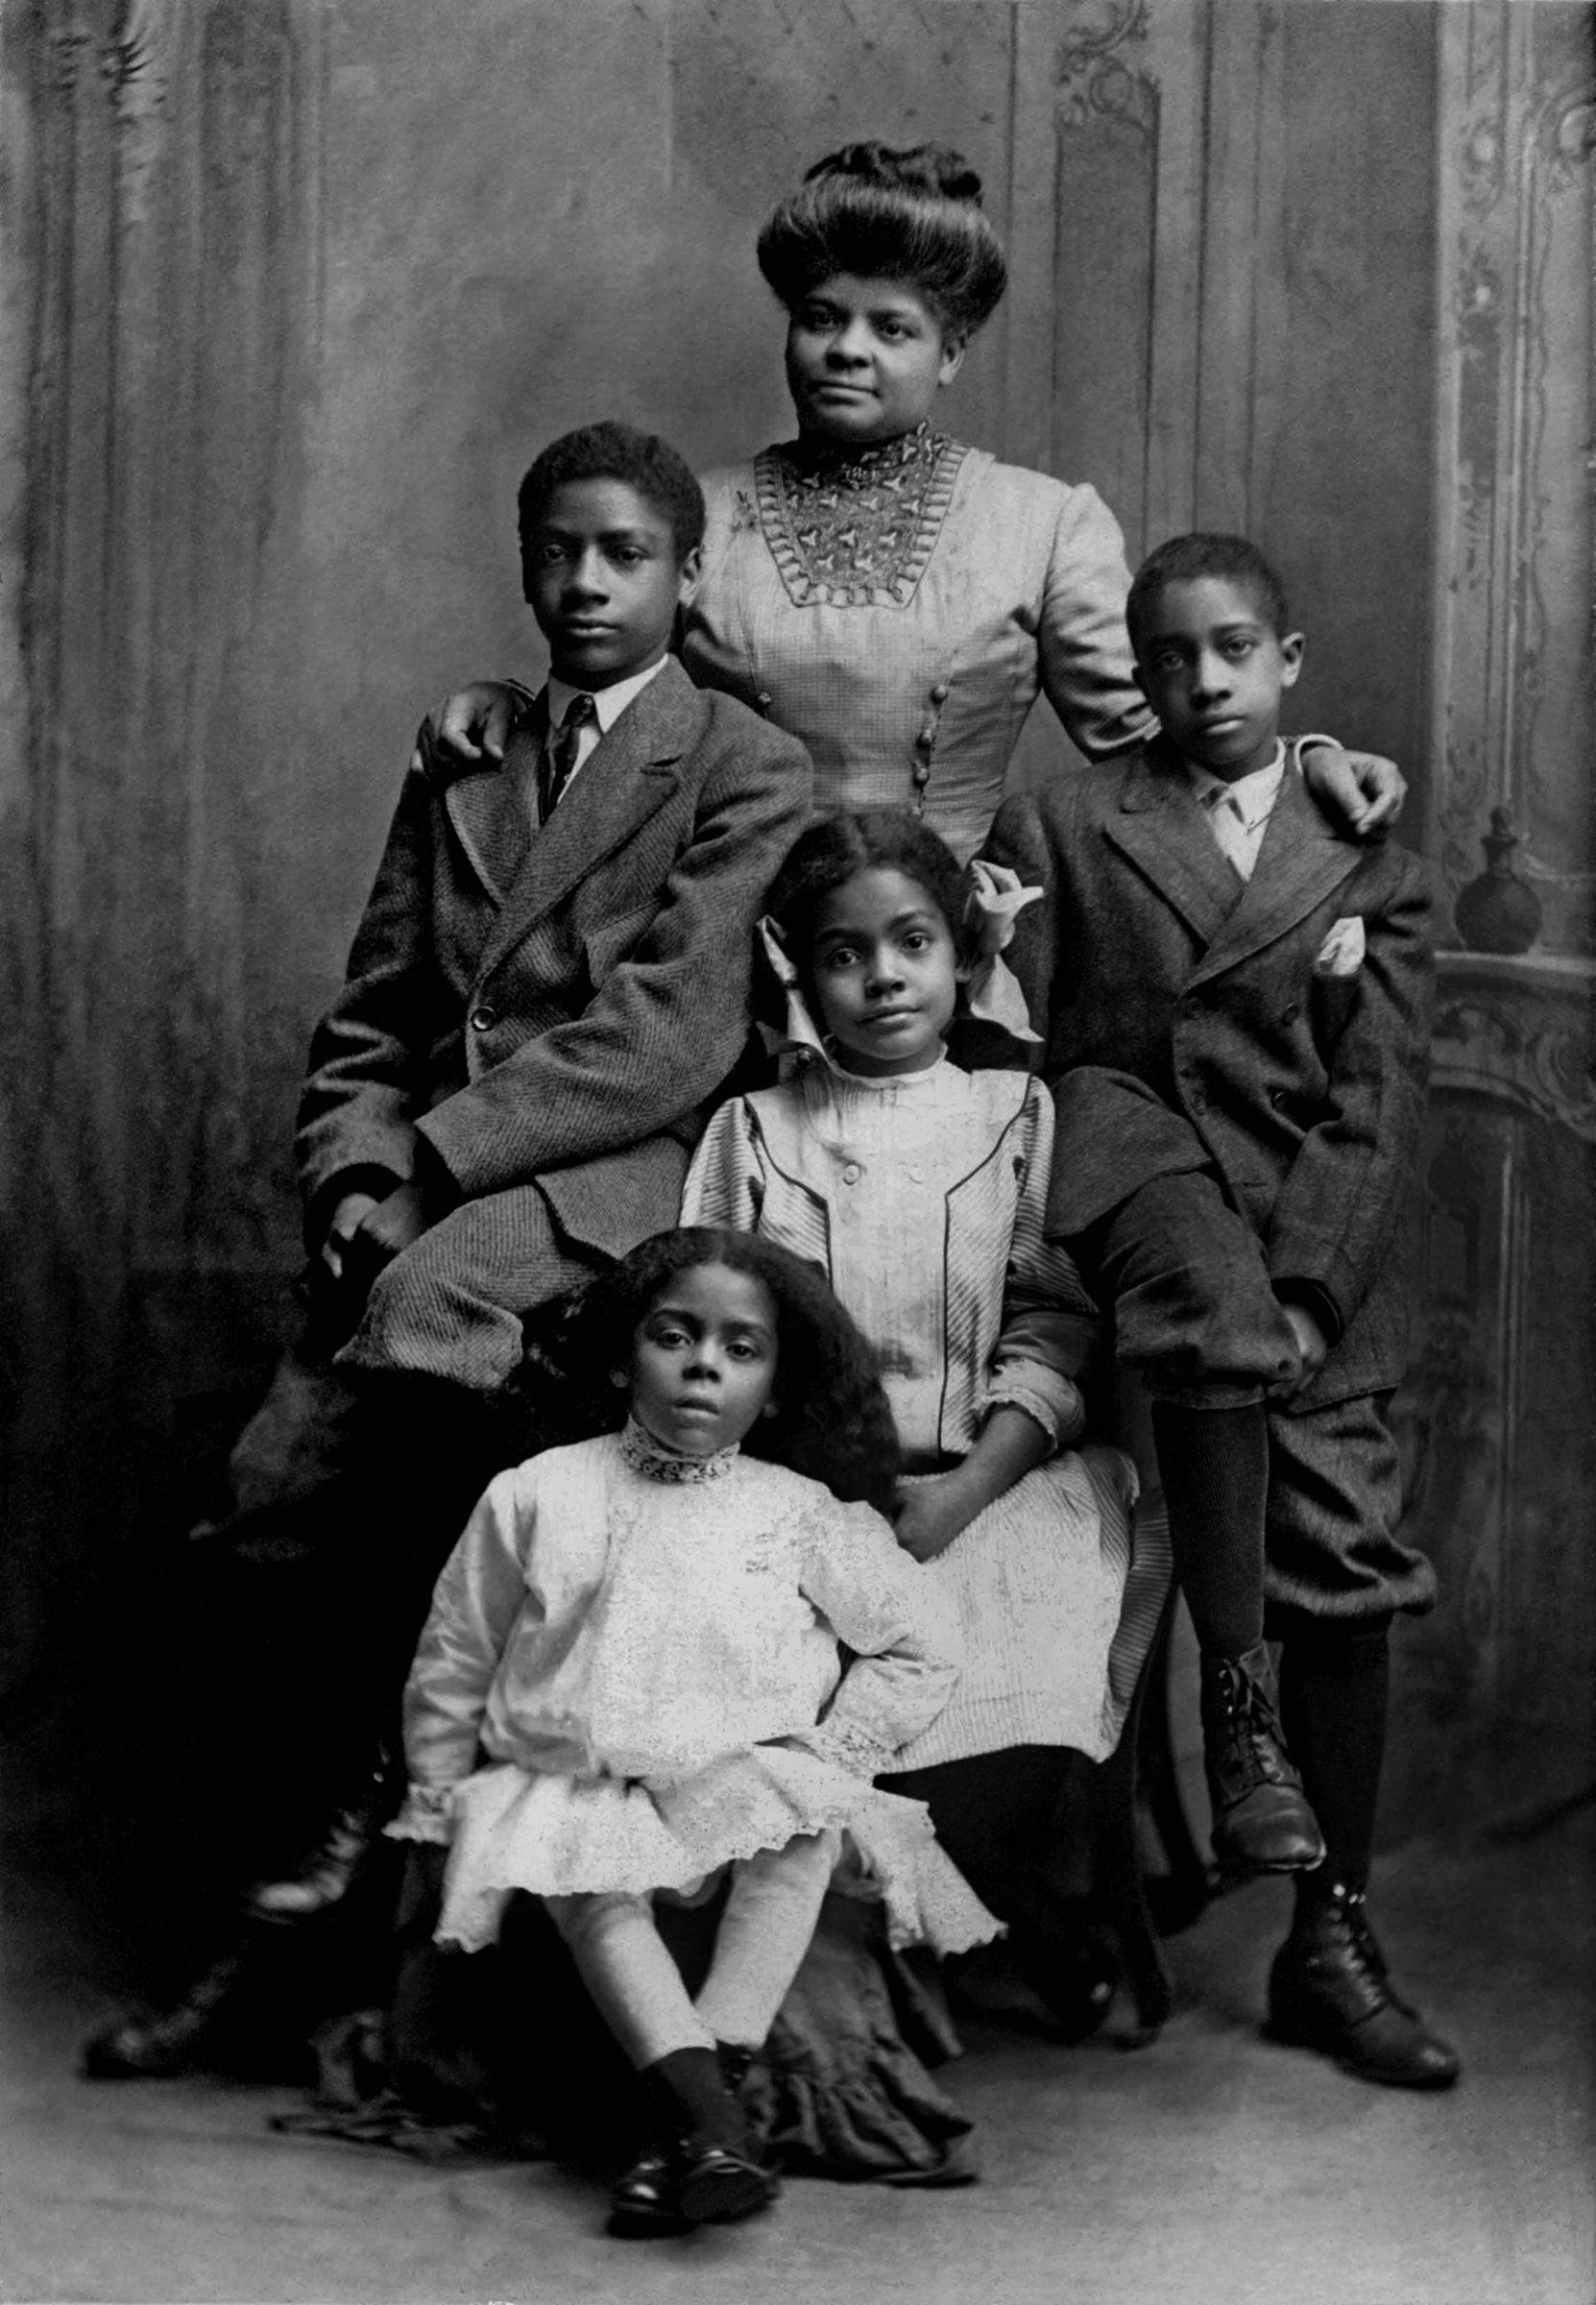 Ida B. Wells in Chicago in 1909 with her children: Charles, Herman, Ida and Alfreda